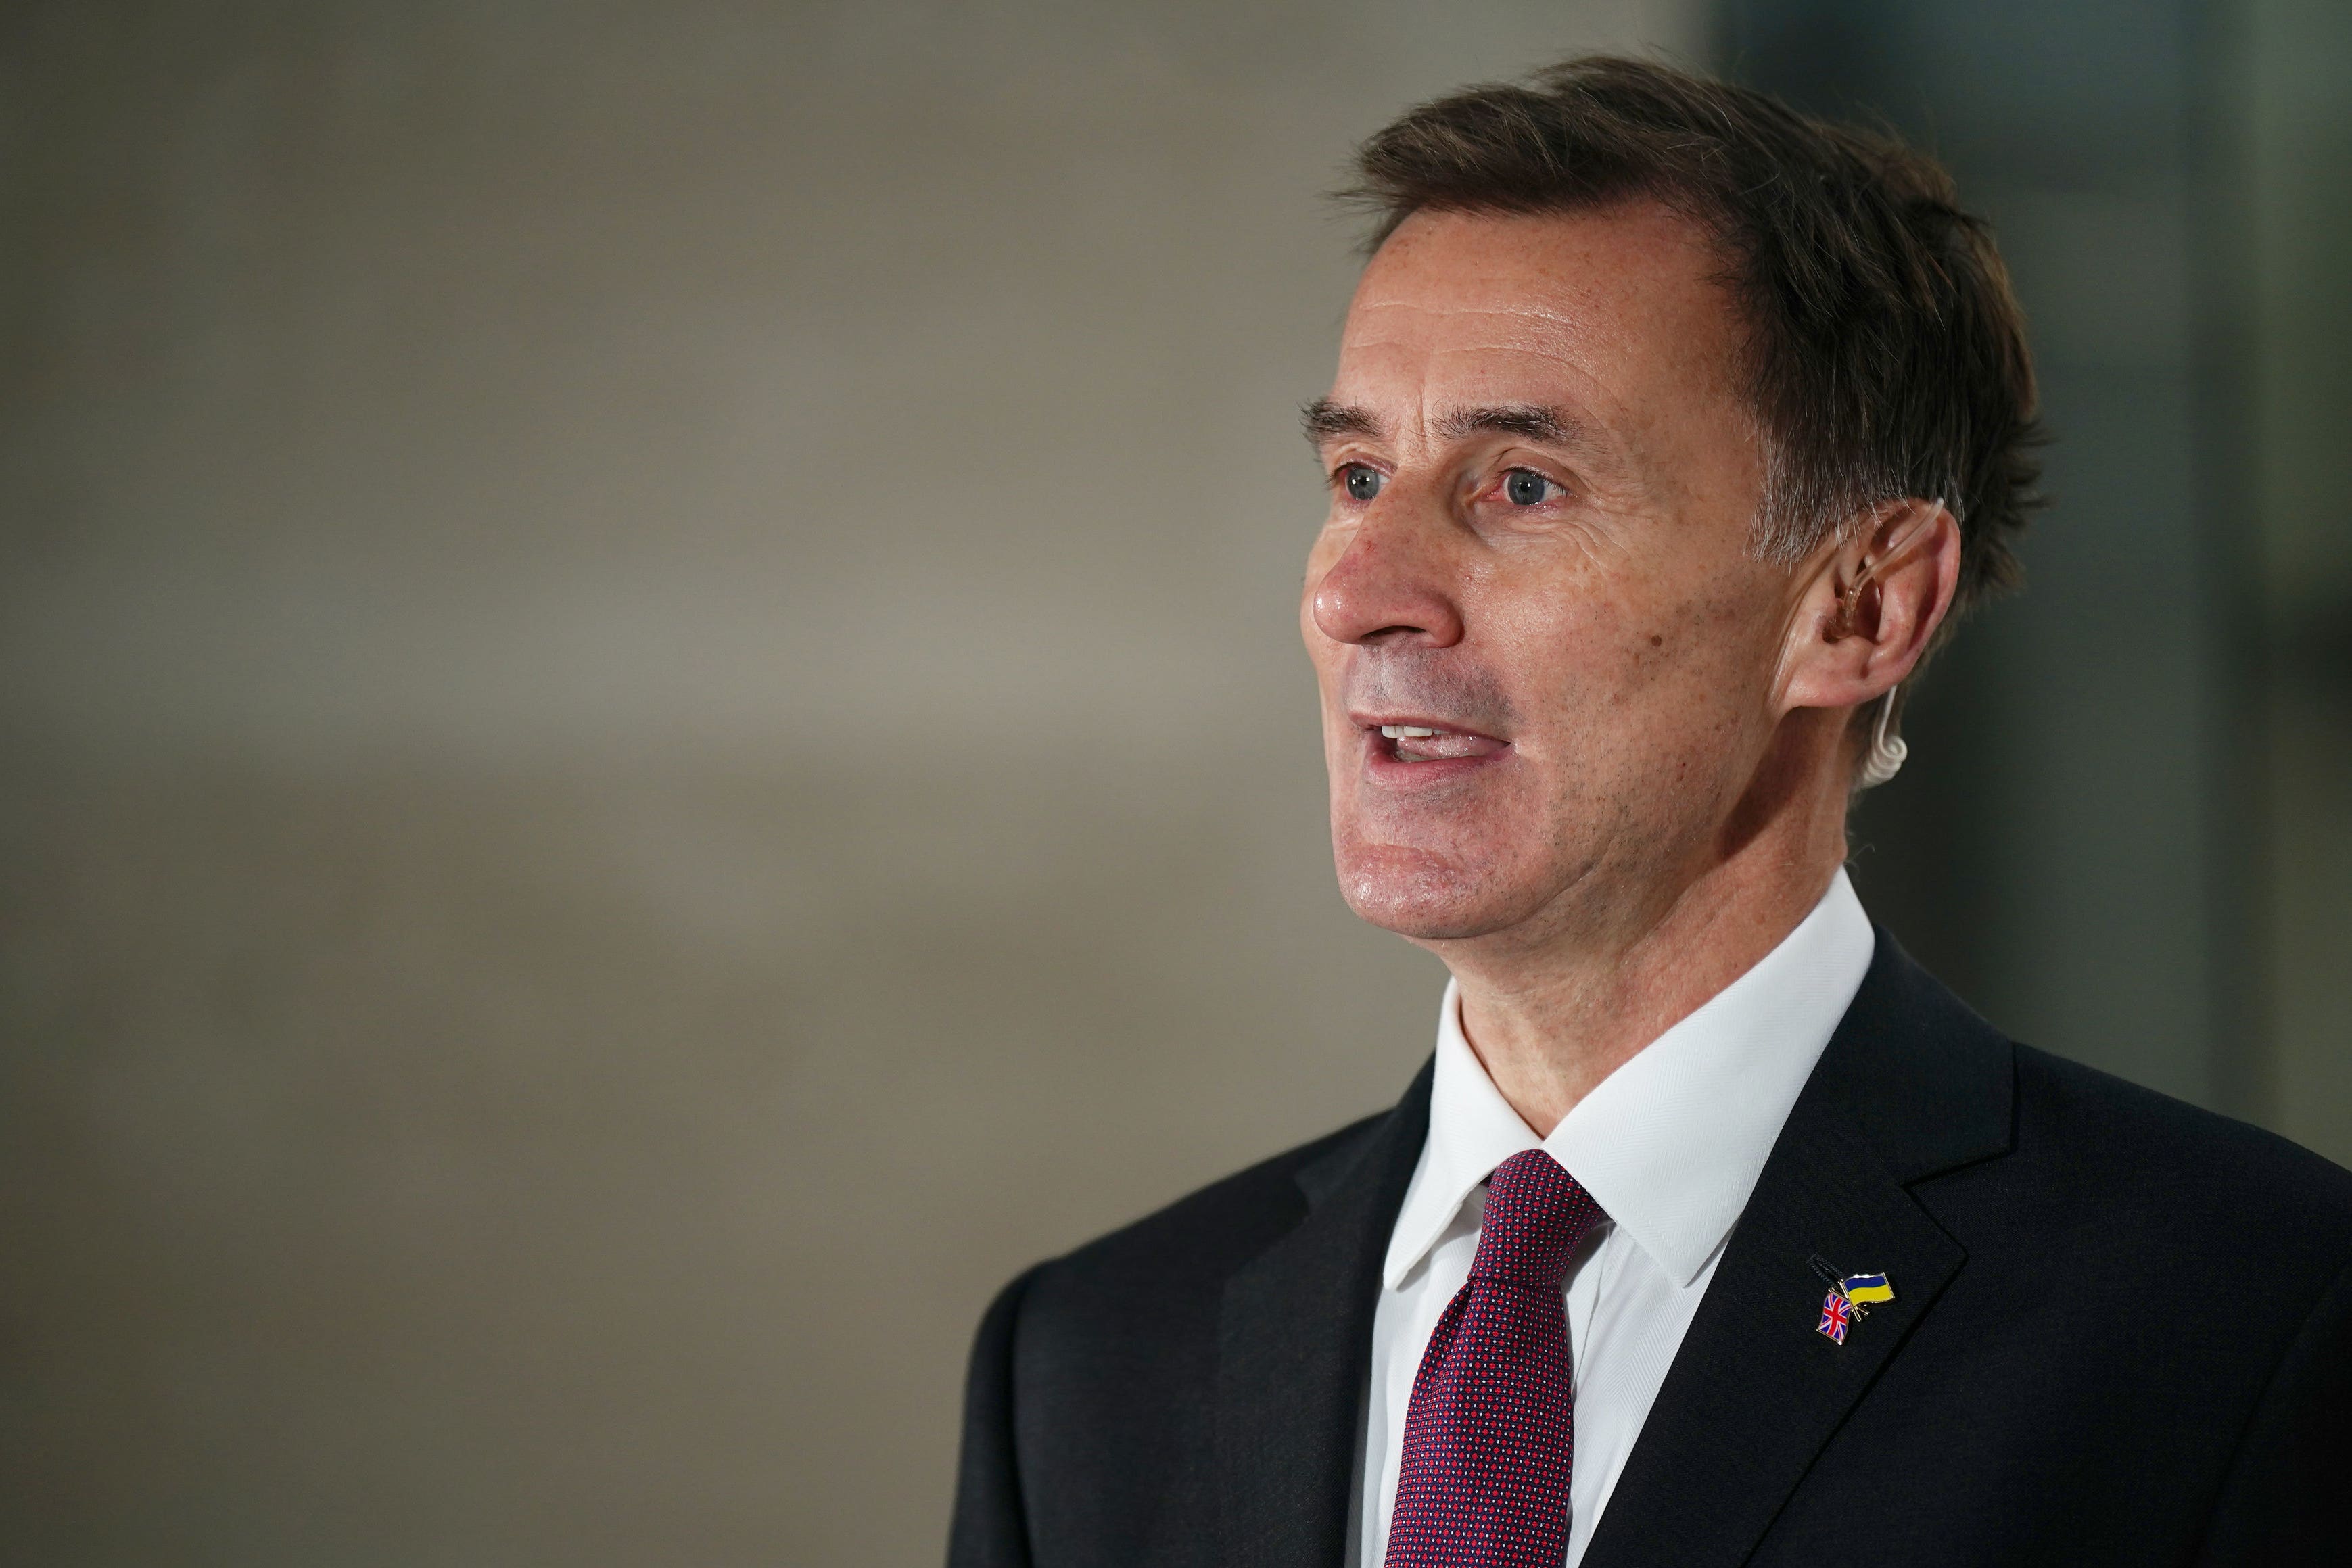 Chancellor Jeremy Hunt will question consumer watchdogs on Wednesday over what powers they can use to help lower prices (Aaron Chown/PA)